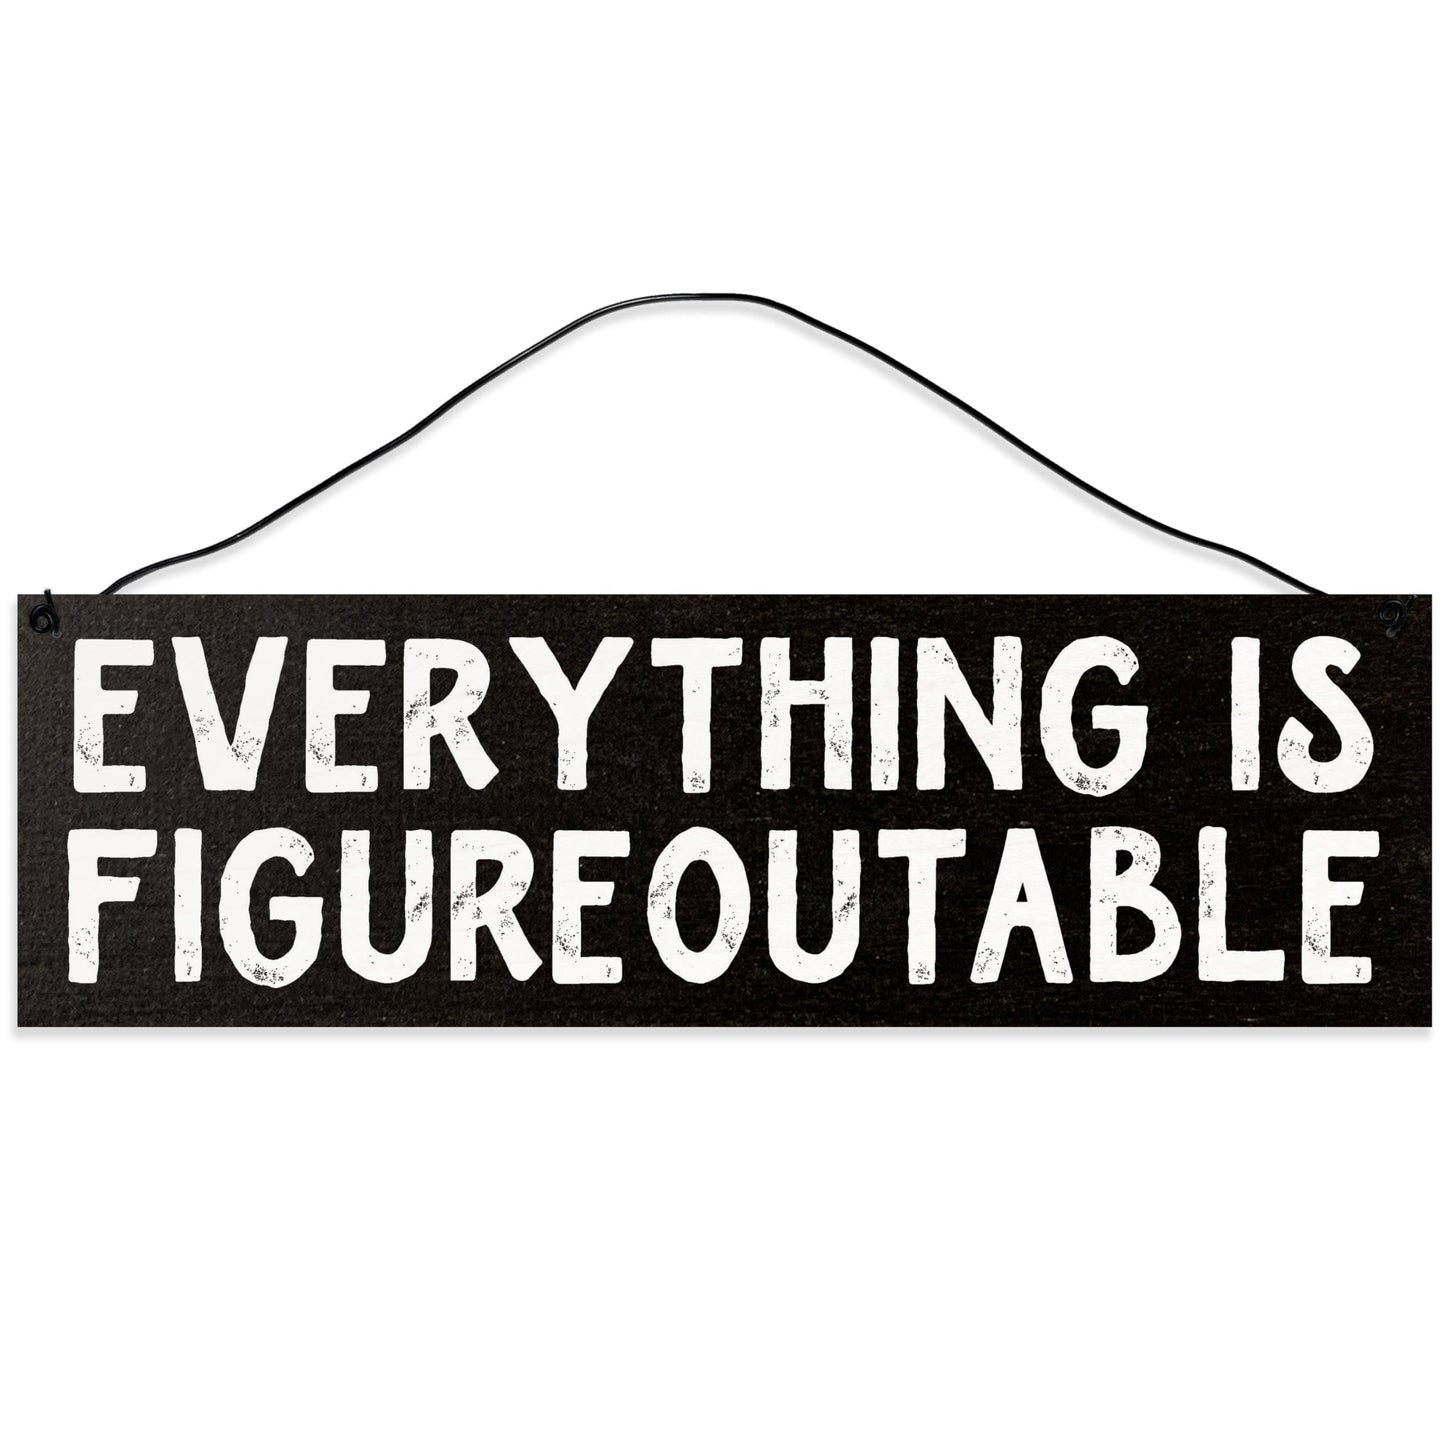 Figureoutable | Office Décor | Handmade | Wood Sign | Wire Hanger/Stand | UV Printed | Solid Maple